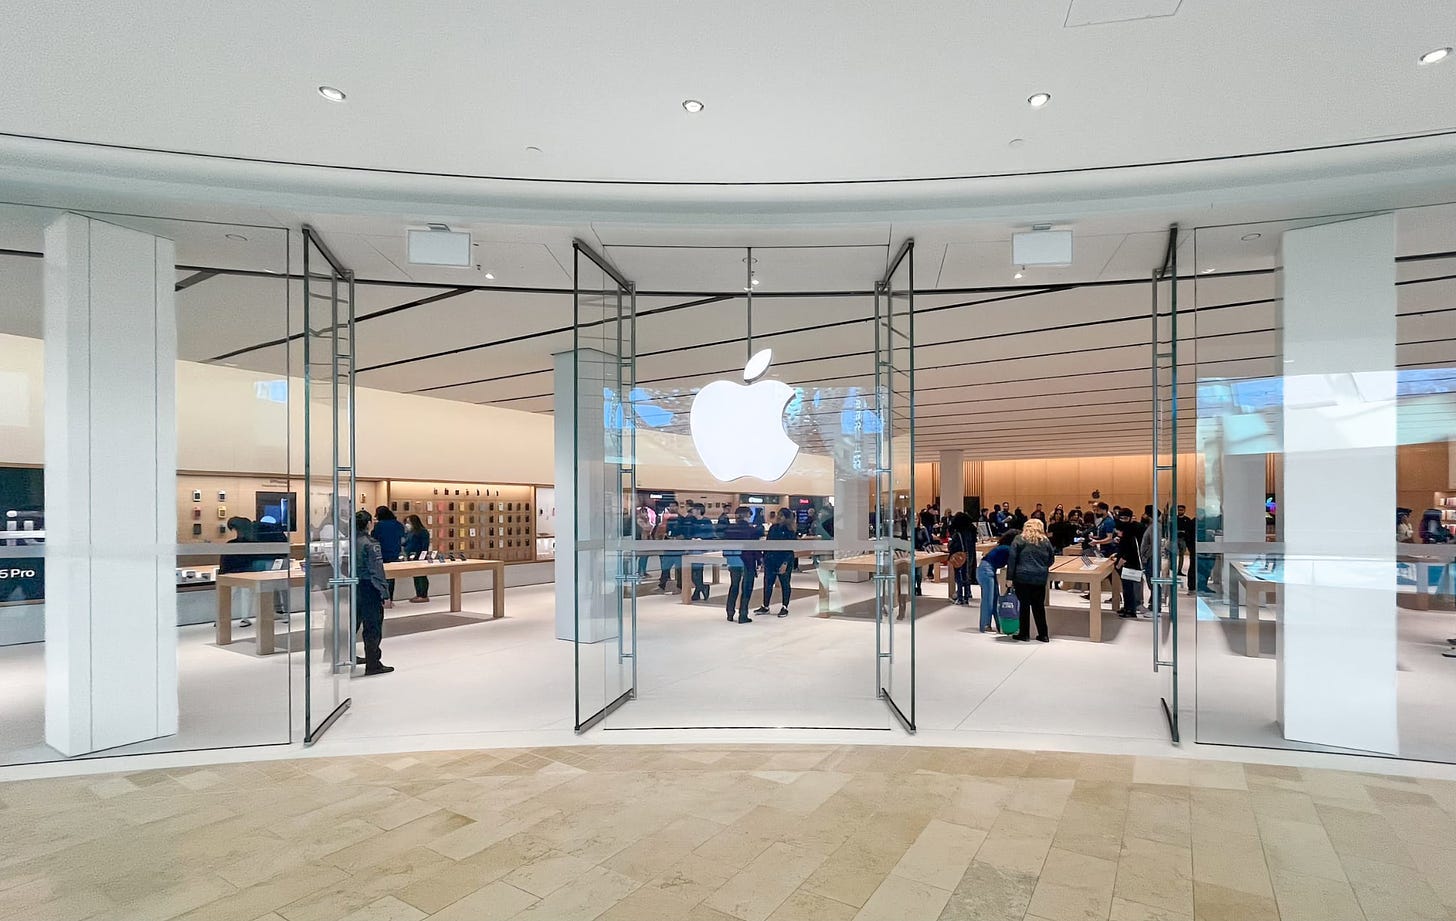 The exterior of Apple Square One, viewed from the mall corridor. A large, glowing Apple logo hangs in the center, framed by two sets of doors.